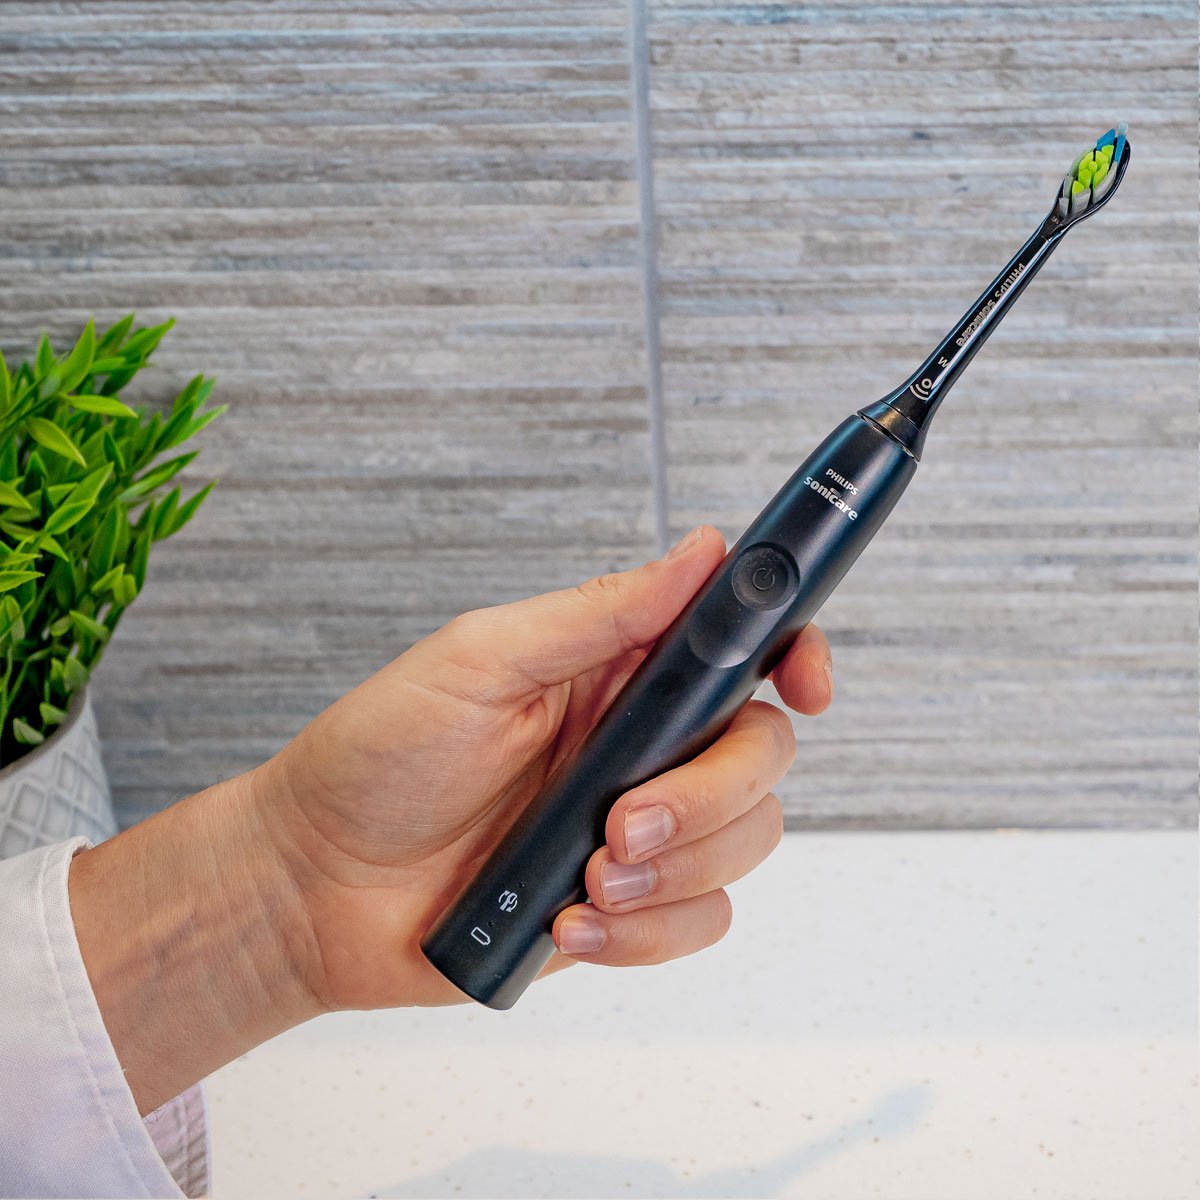 Sonicare 4100 Series held in the hand at a slight angle